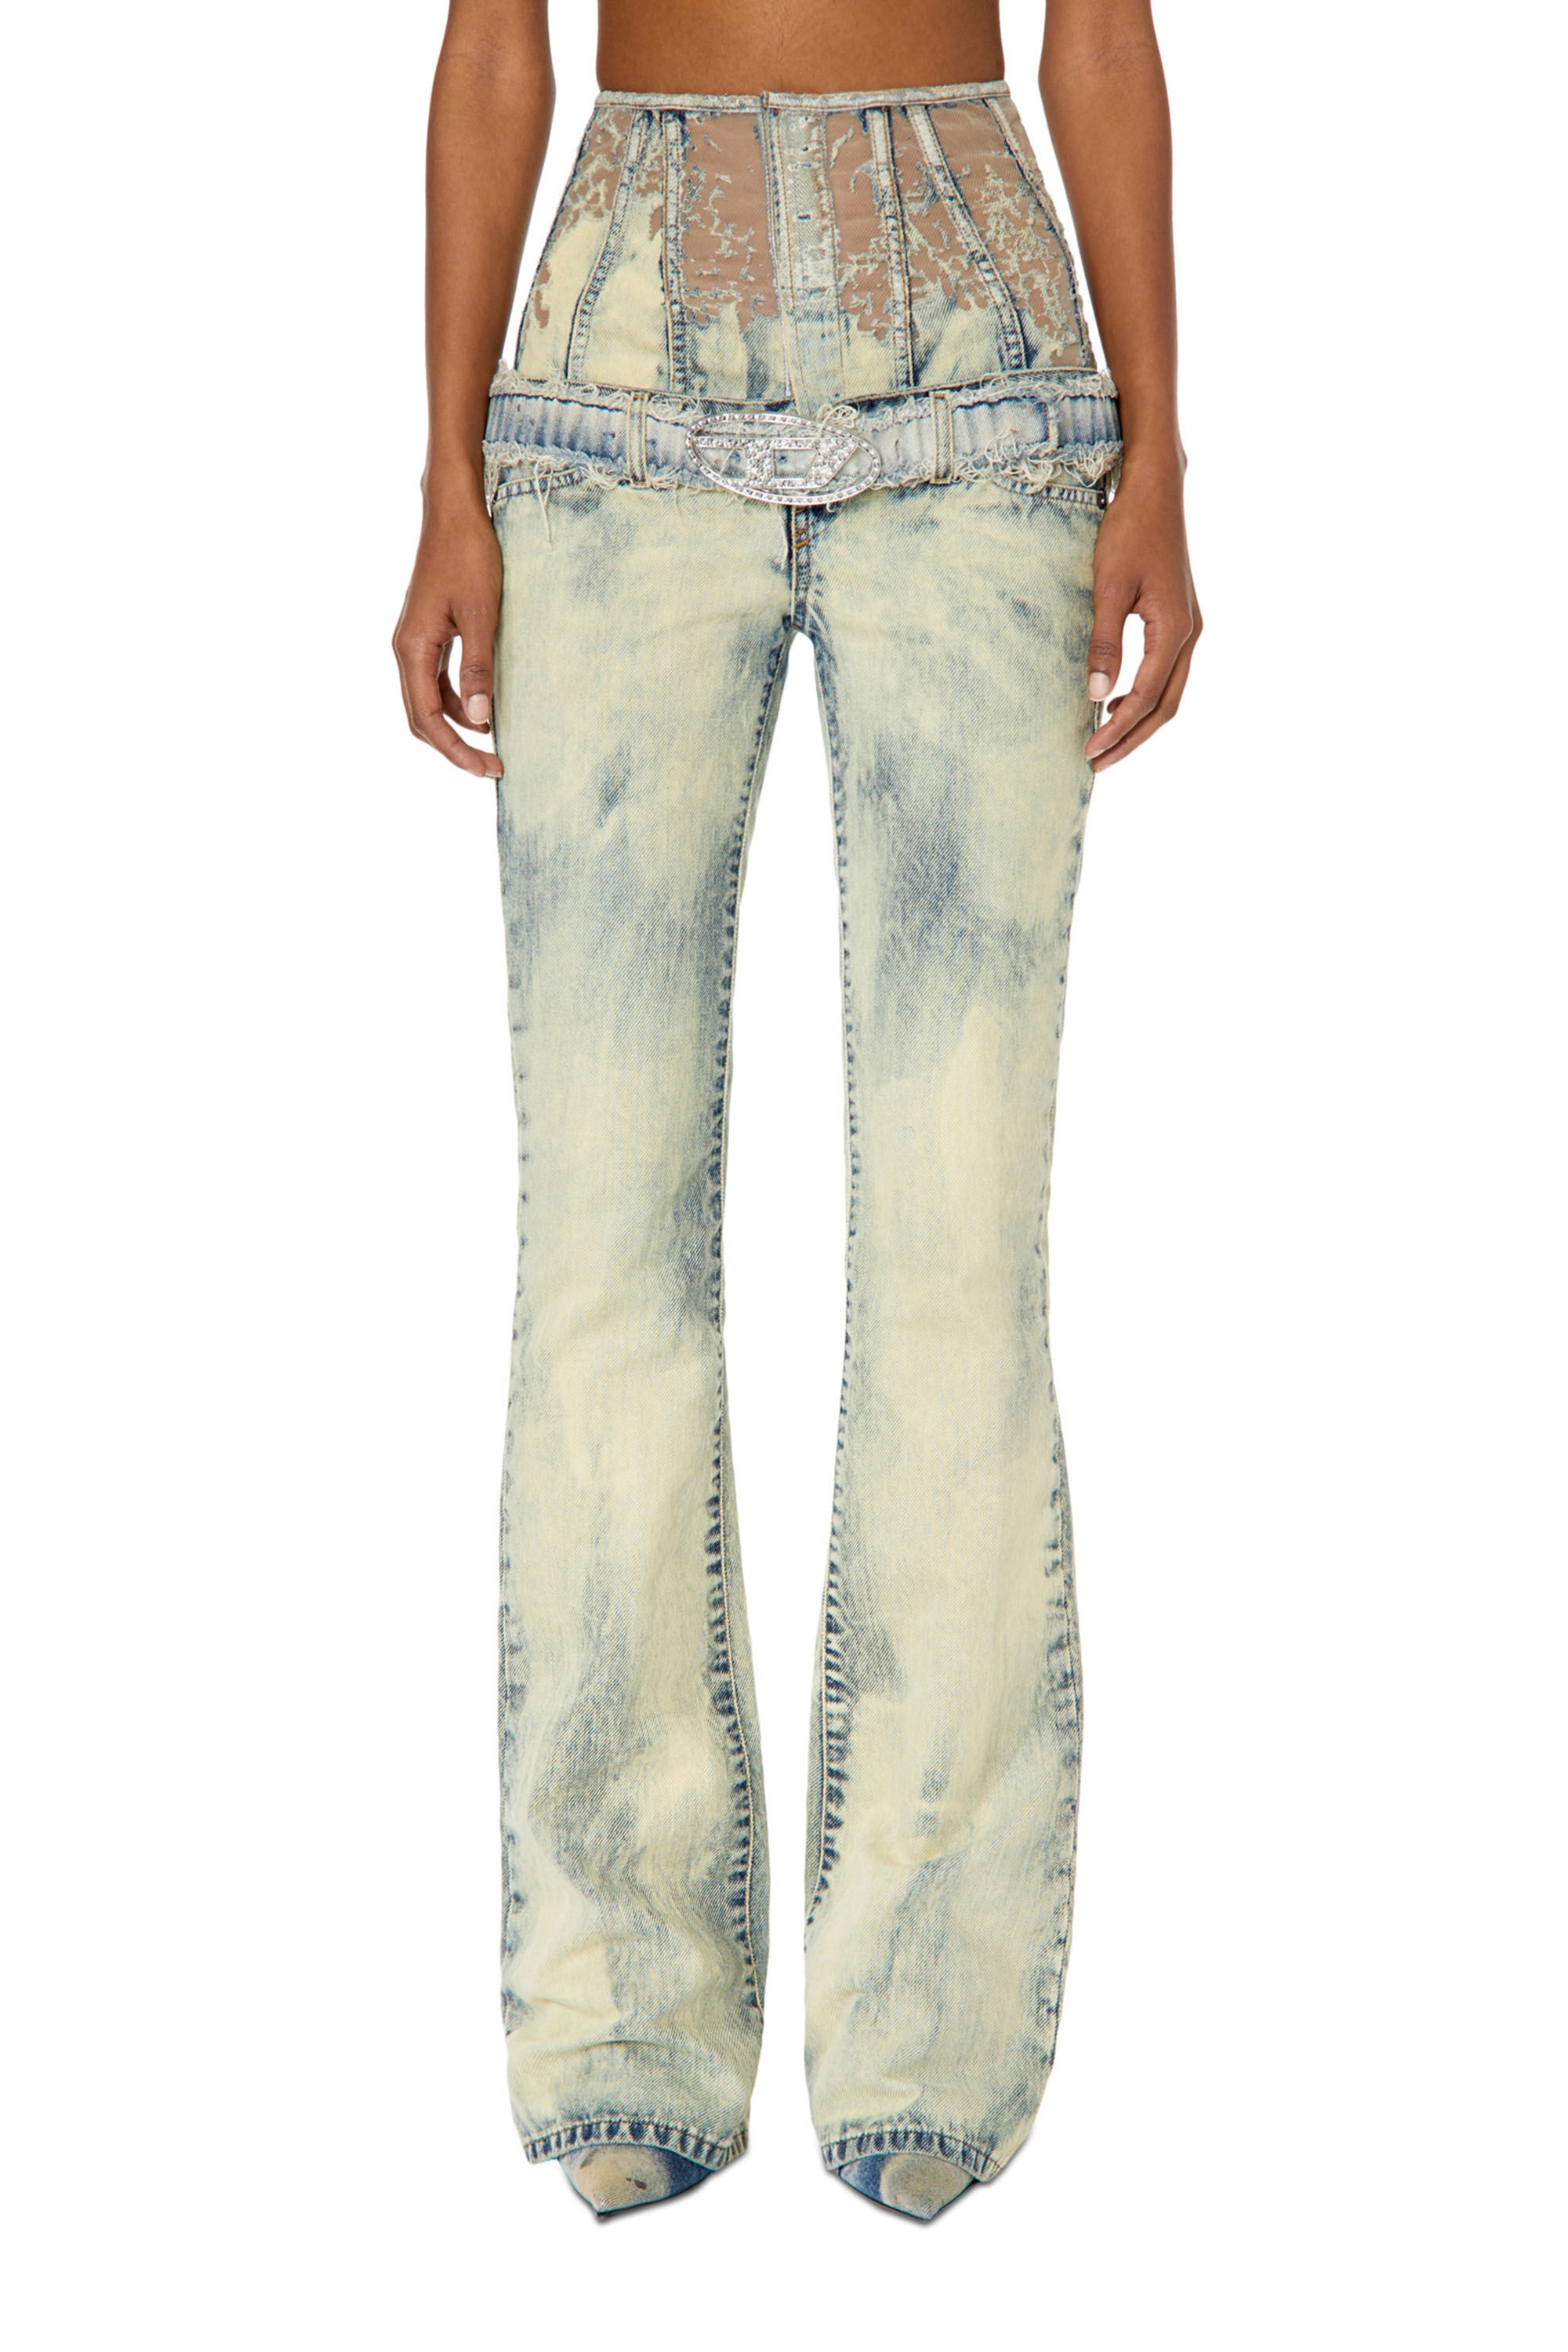 BOOTCUT AND FLARE JEANS 1969 D-EBBEY 068GP - 3